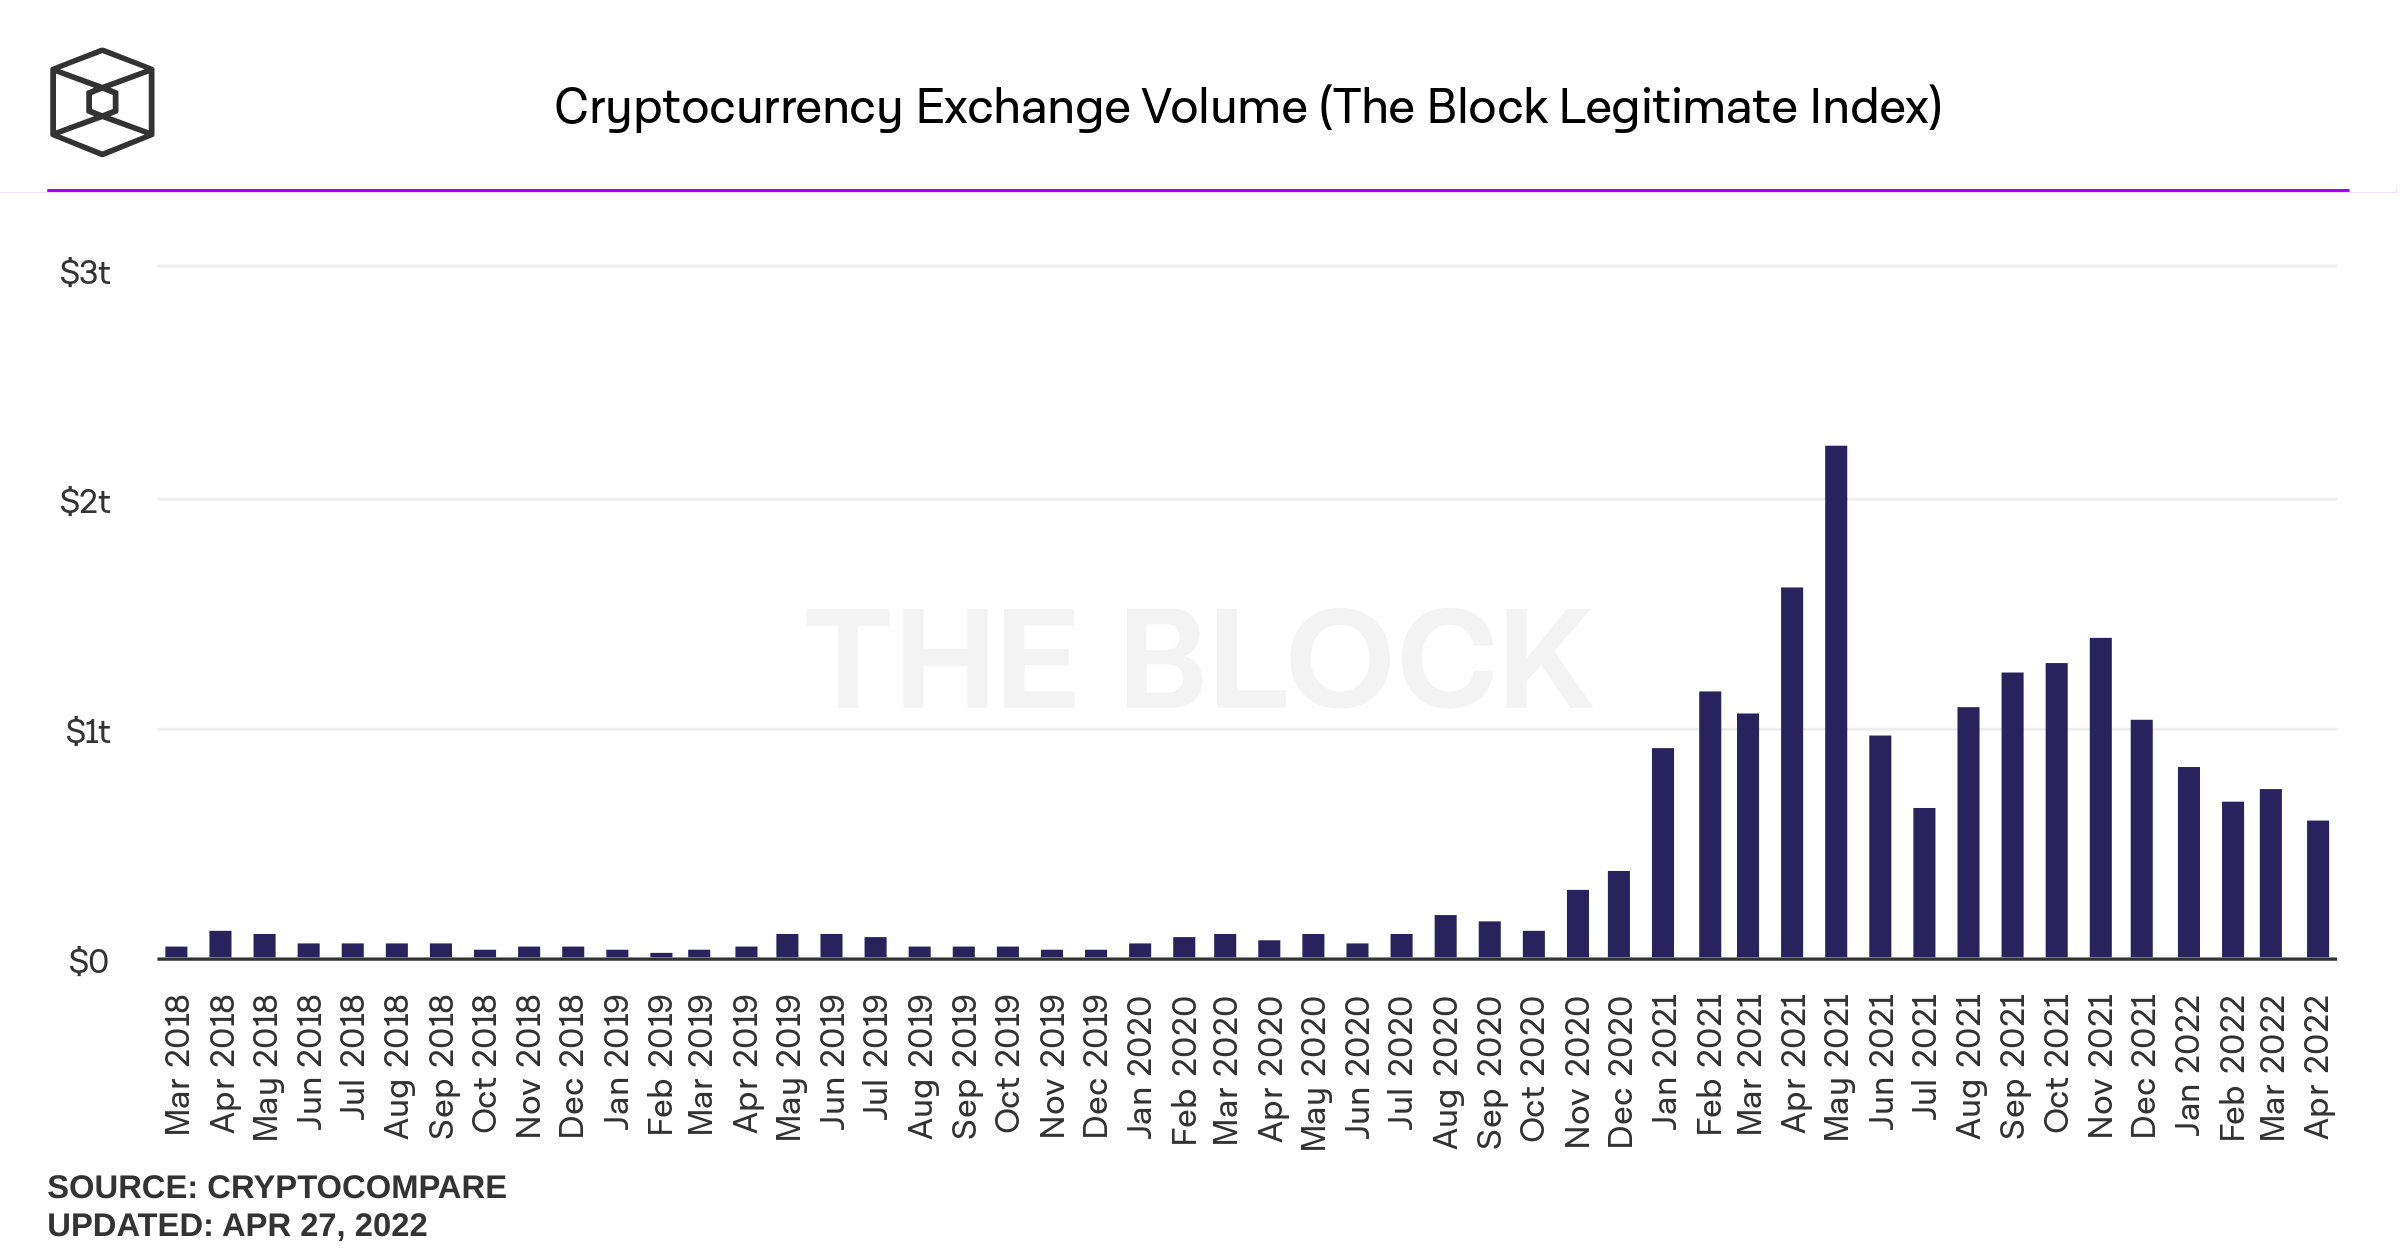 Derivatives, cash markets, Dex swaps — 30-day crypto trade volumes have slid across the board over the past month